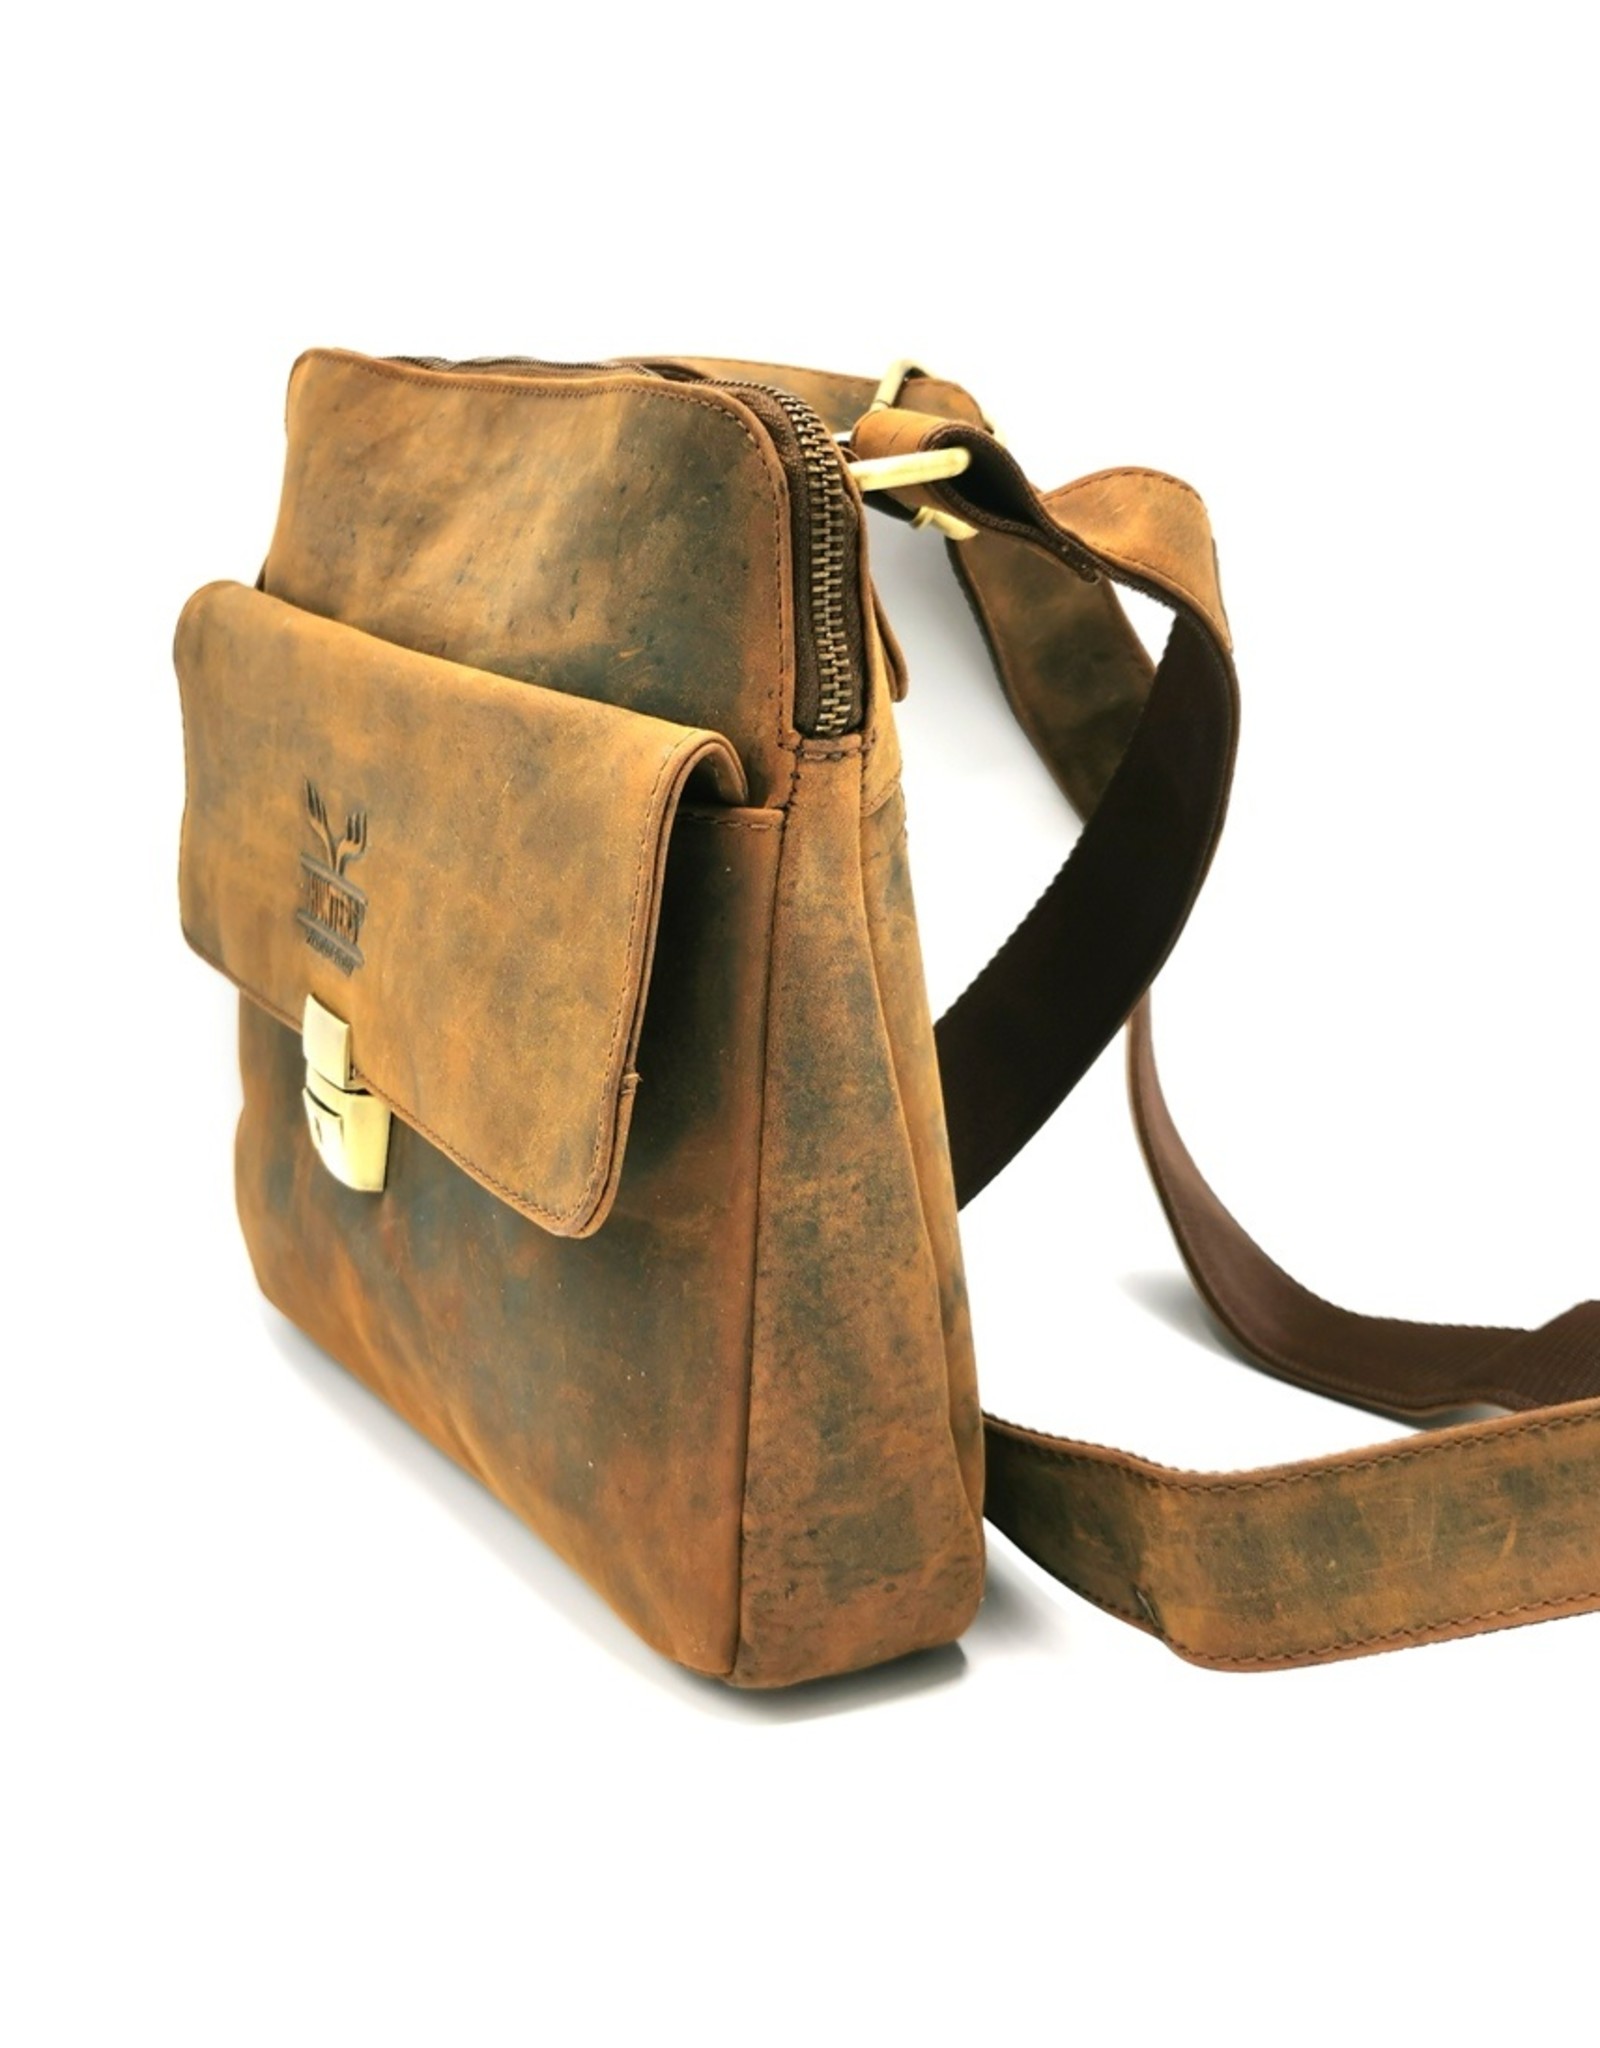 Hunters Leather Shoulder bags  Leather crossbody bags - Hunters tablet bag - Crossbody bag Buffalo leather